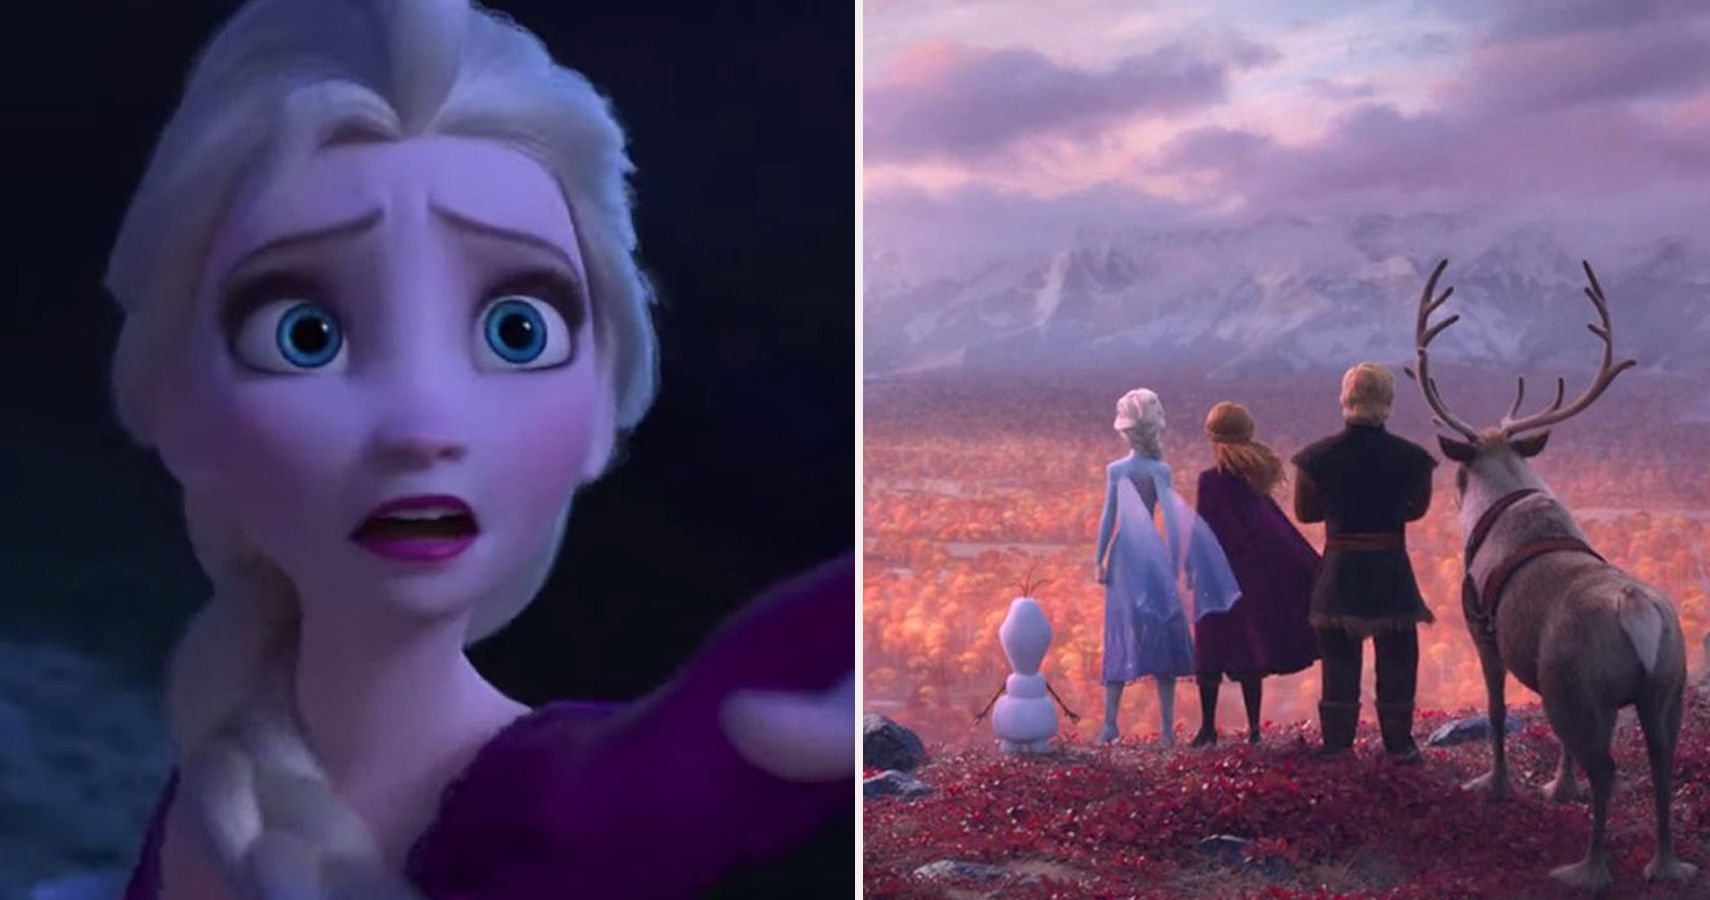 Frozen 2 10 Things You Missed In The Trailer Screenrant 5030